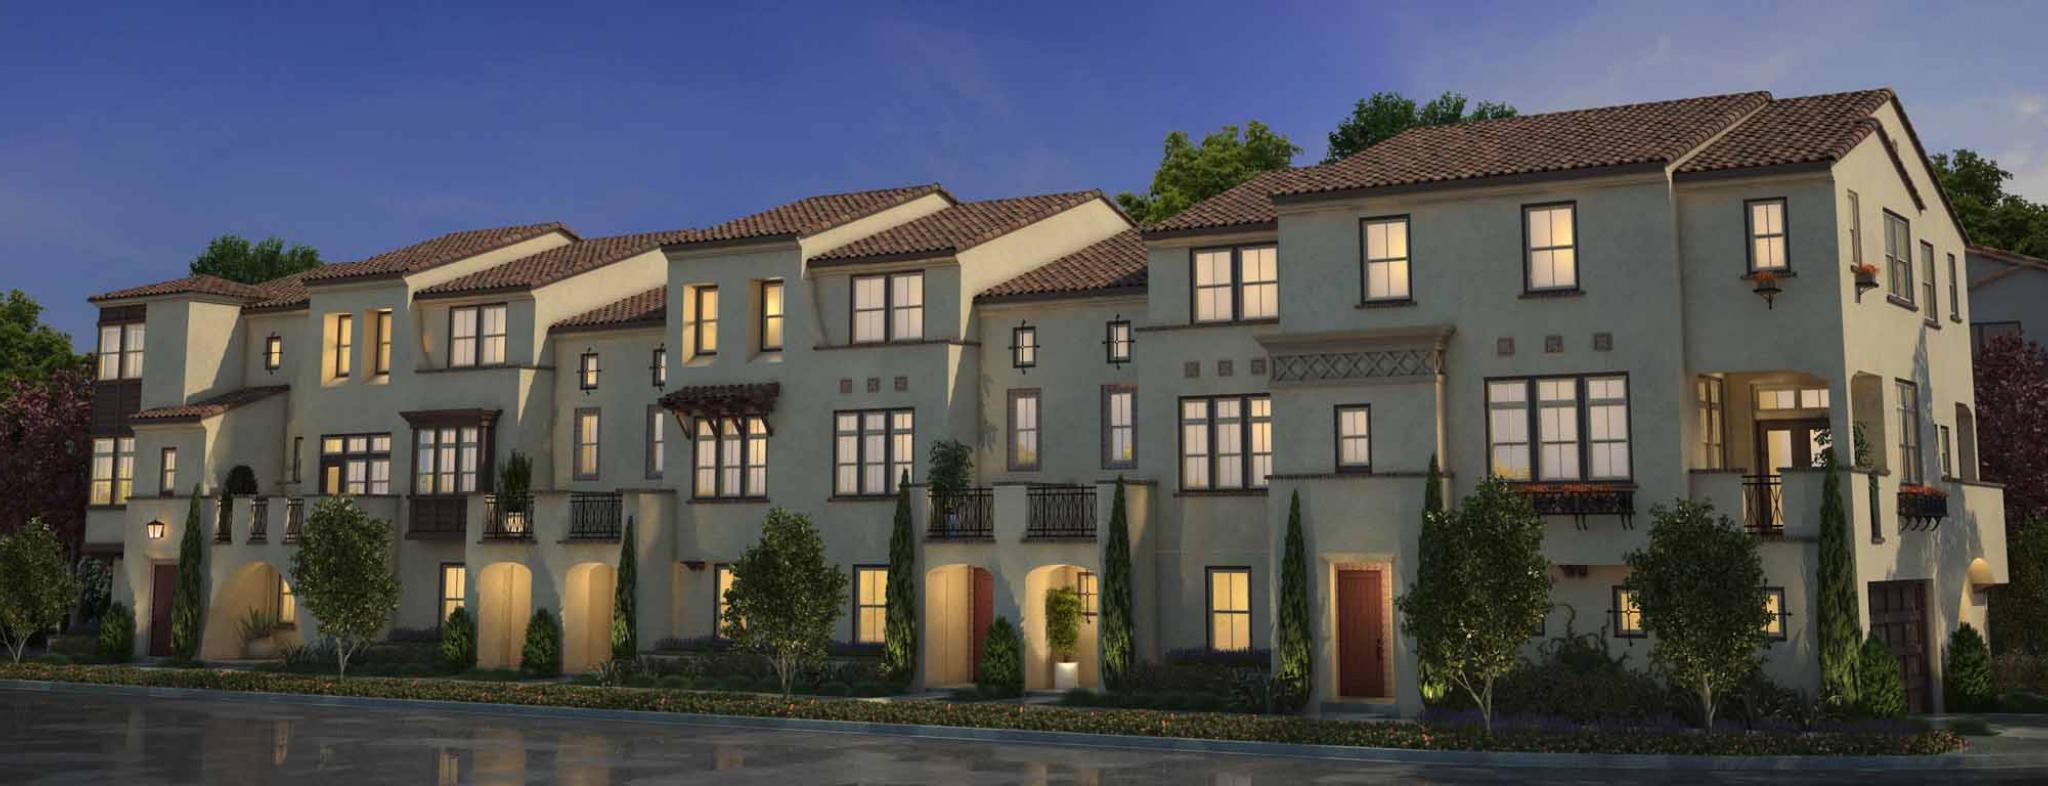 The New Home Company Announces Emerson, a Community of Contemporary Townhomes in a Prime Silicon Valley Location